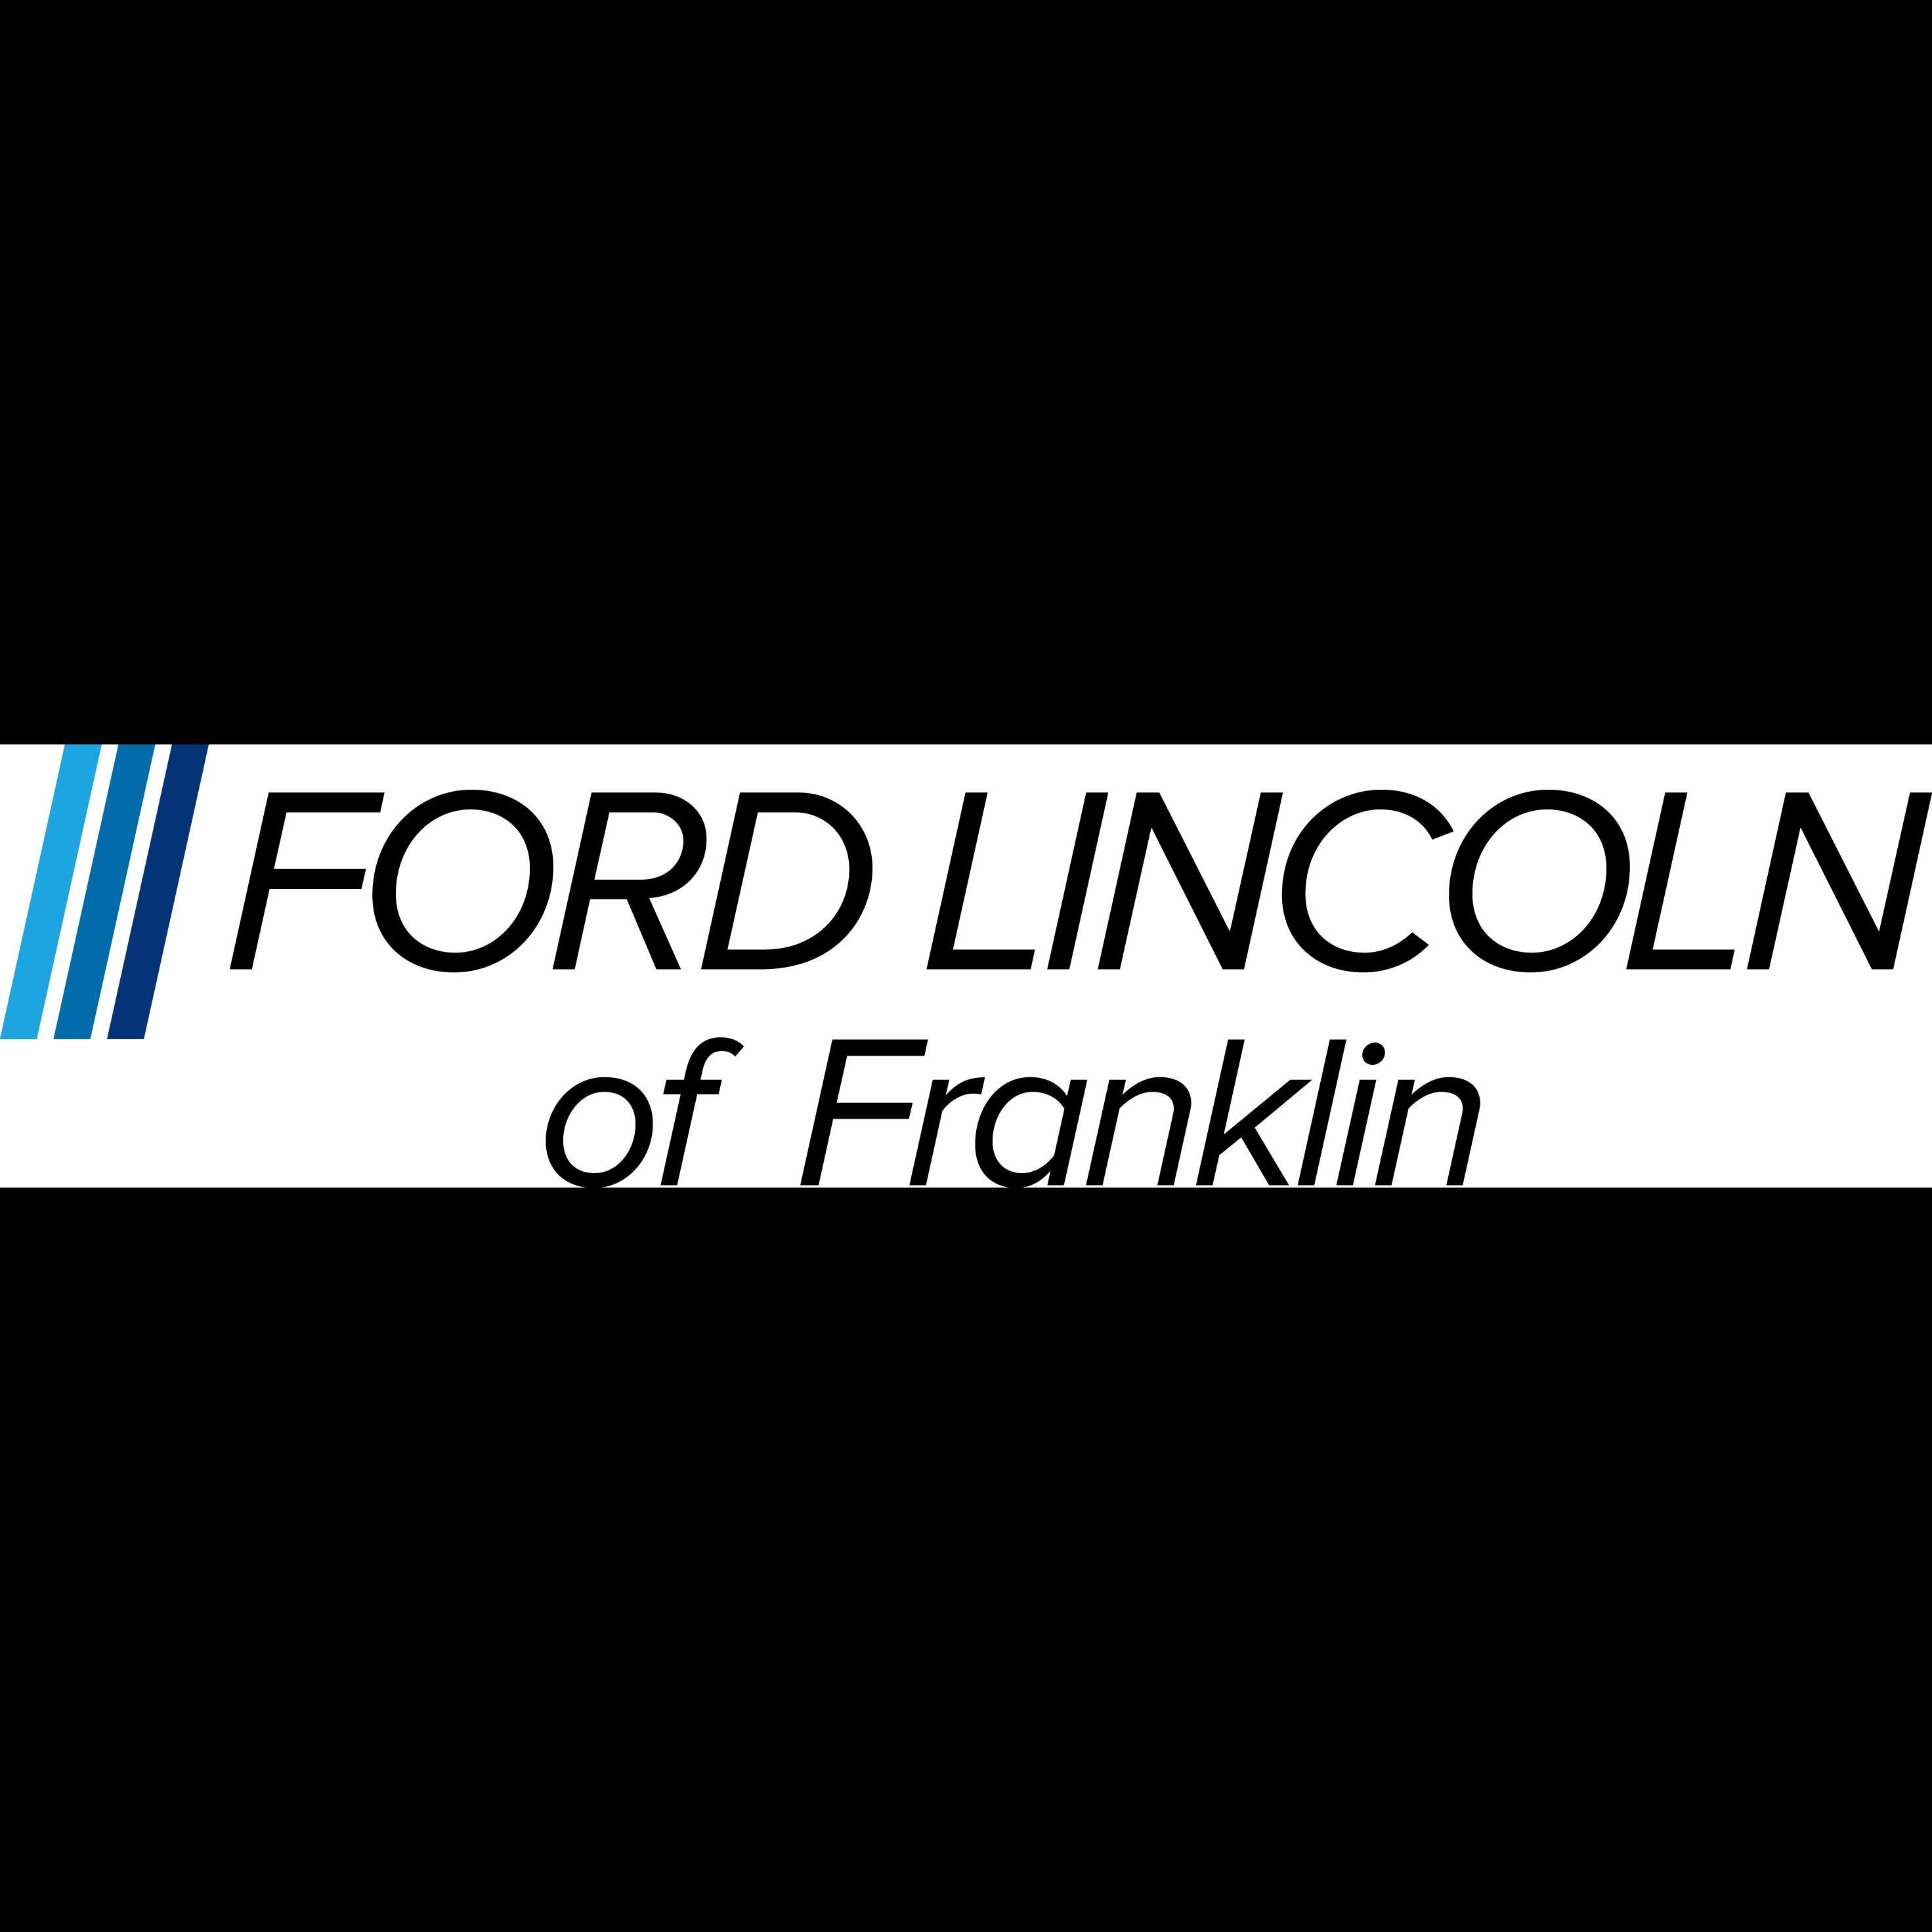 Ford Lincoln of Franklin Photo